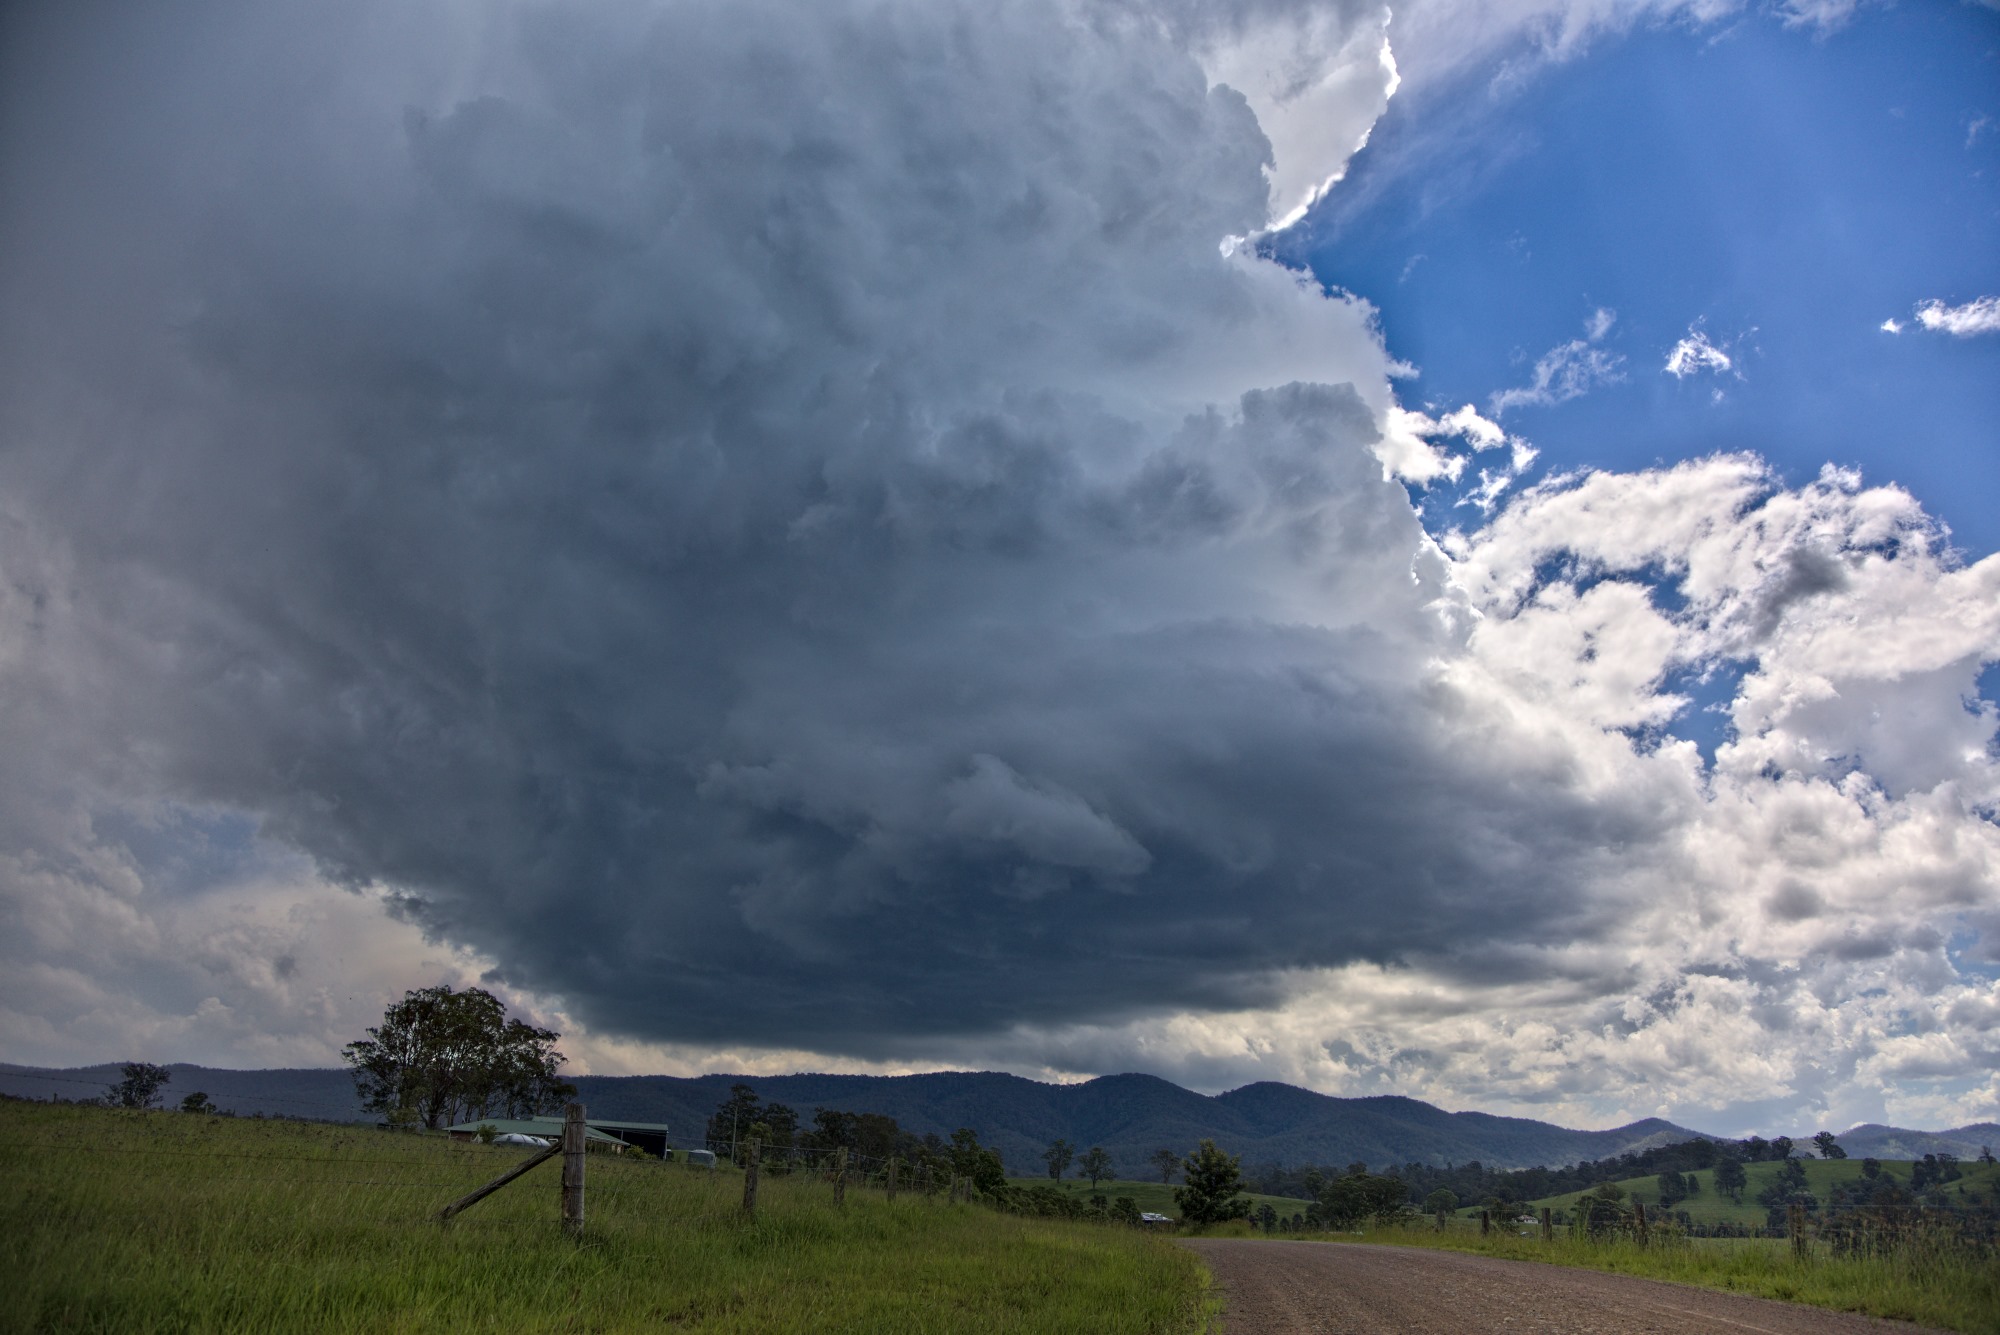 Got the first storm S of Gloucester from birth which quivkly became a supercell but took the wrong turn elsewhere and missed getting onto the hook whi...